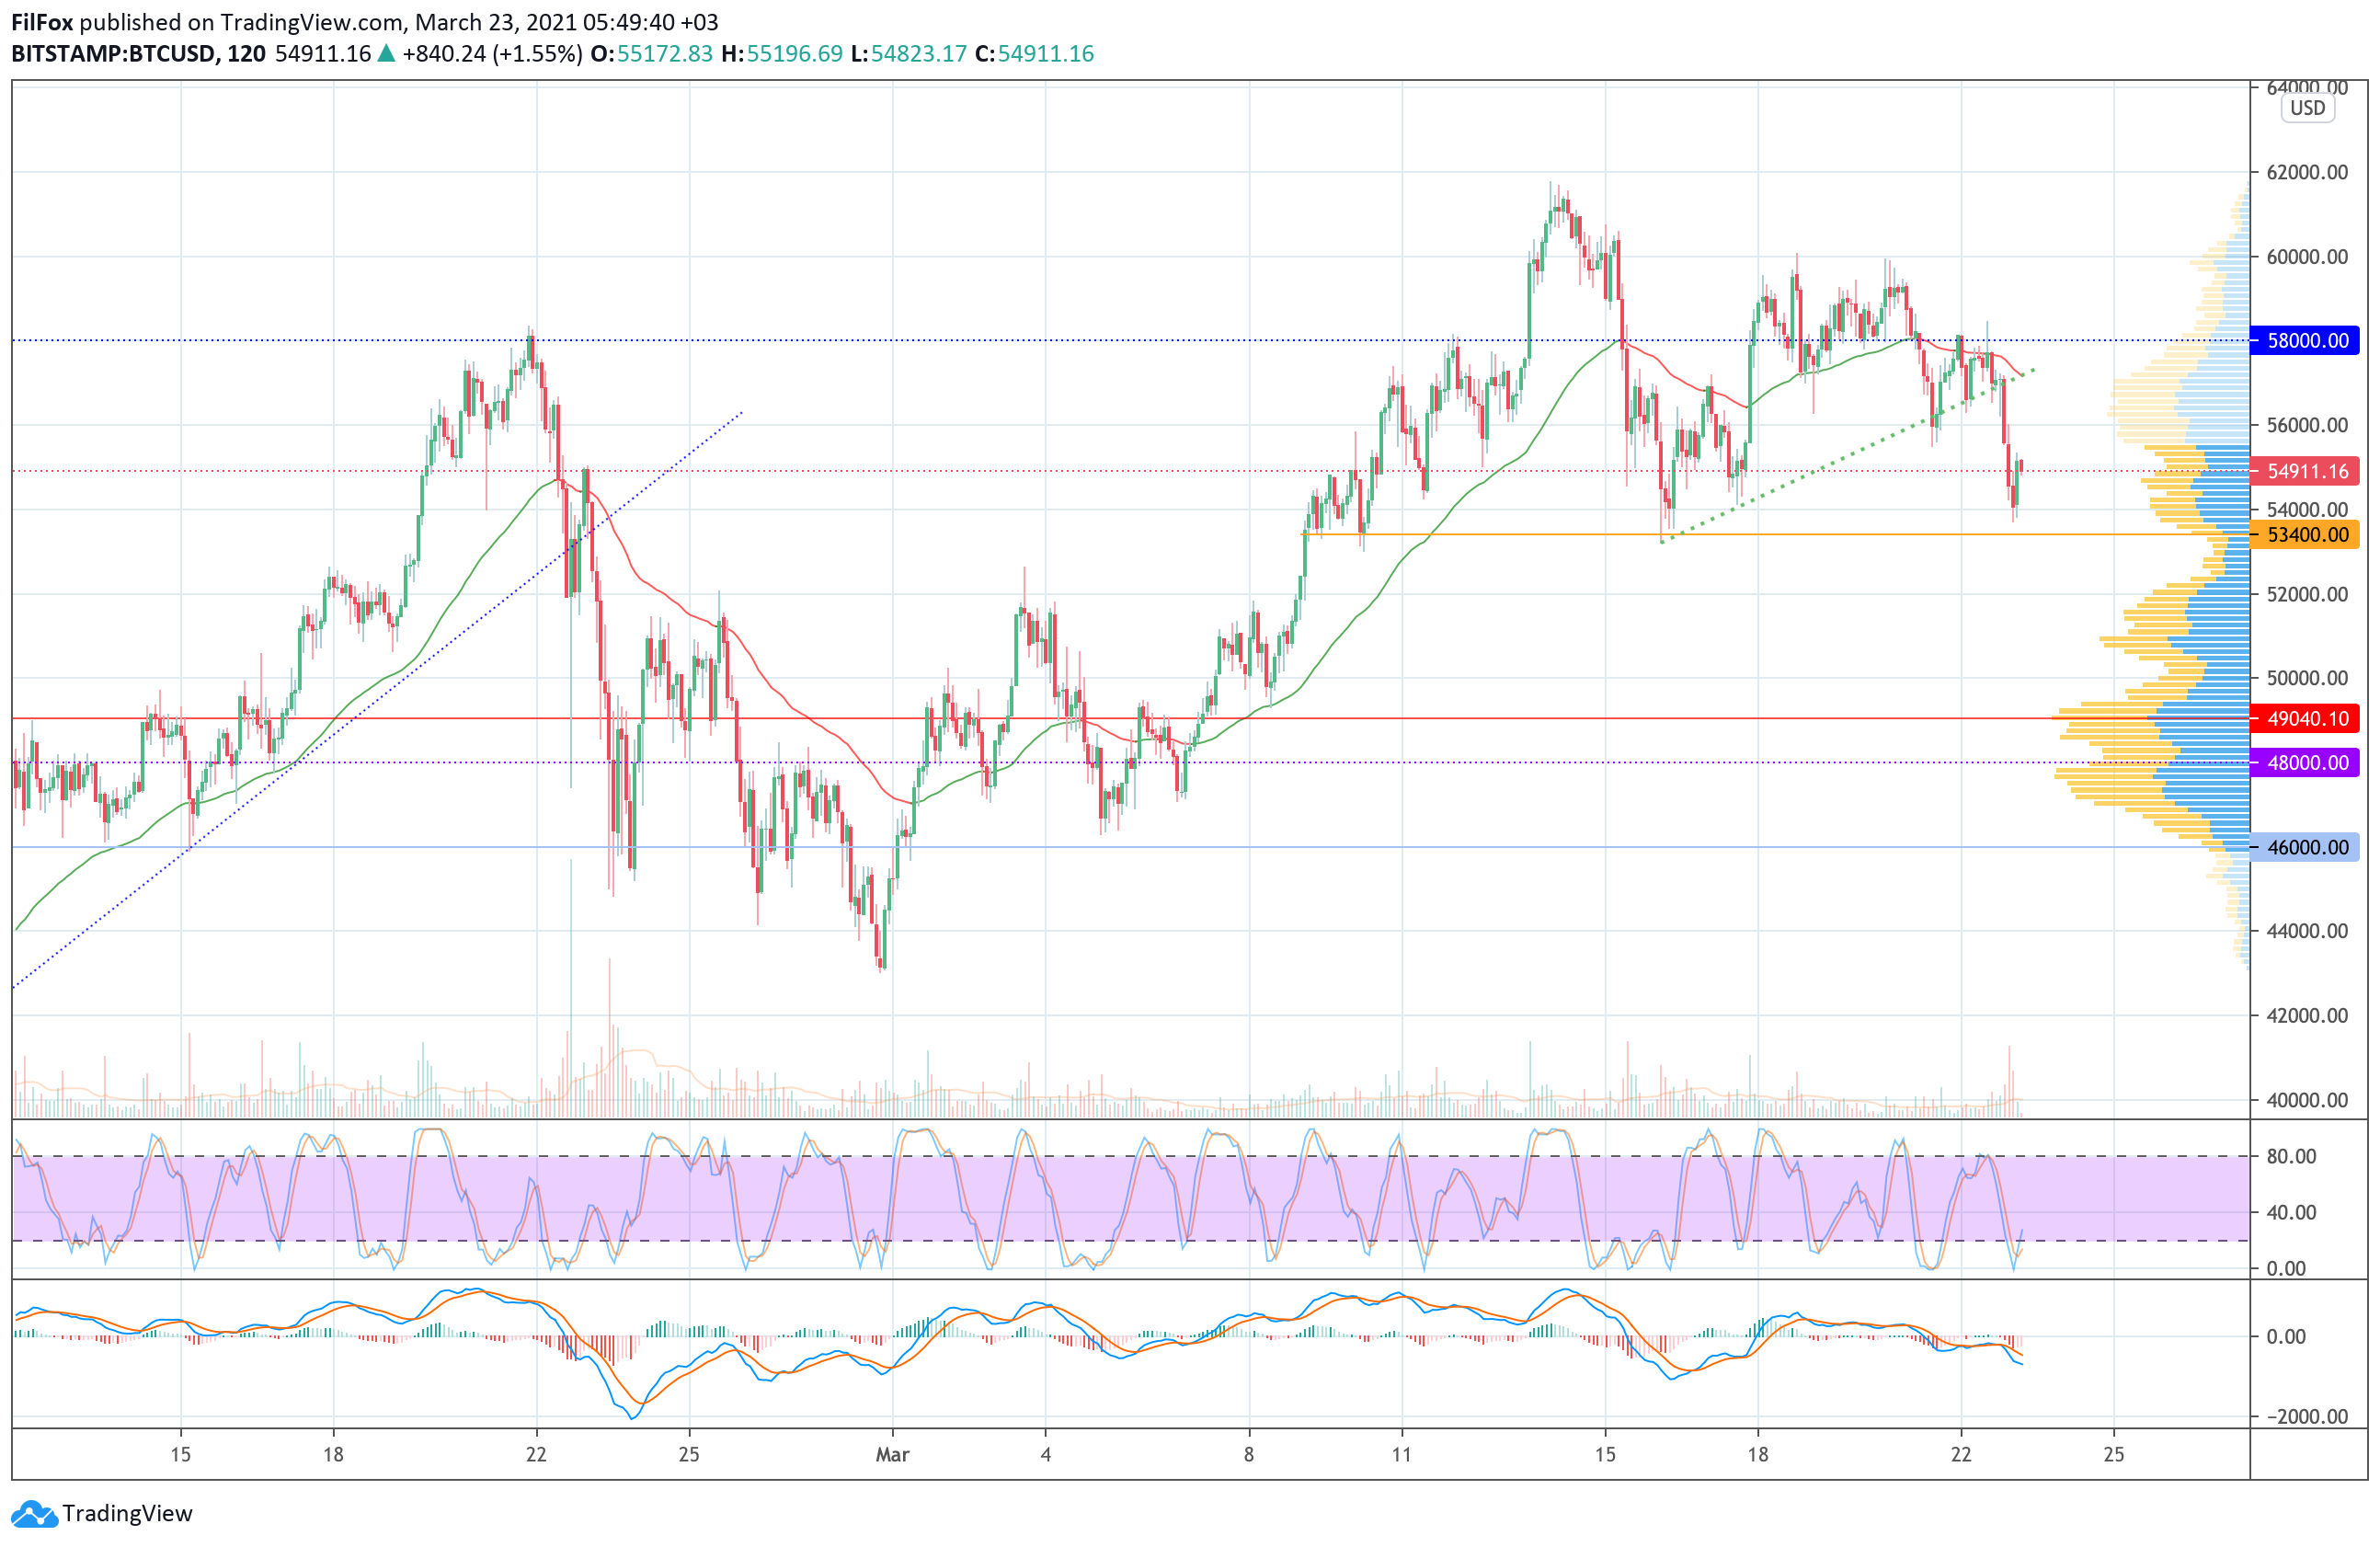 Analysis of the prices of Bitcoin, Ethereum, XRP for 03/23/2021